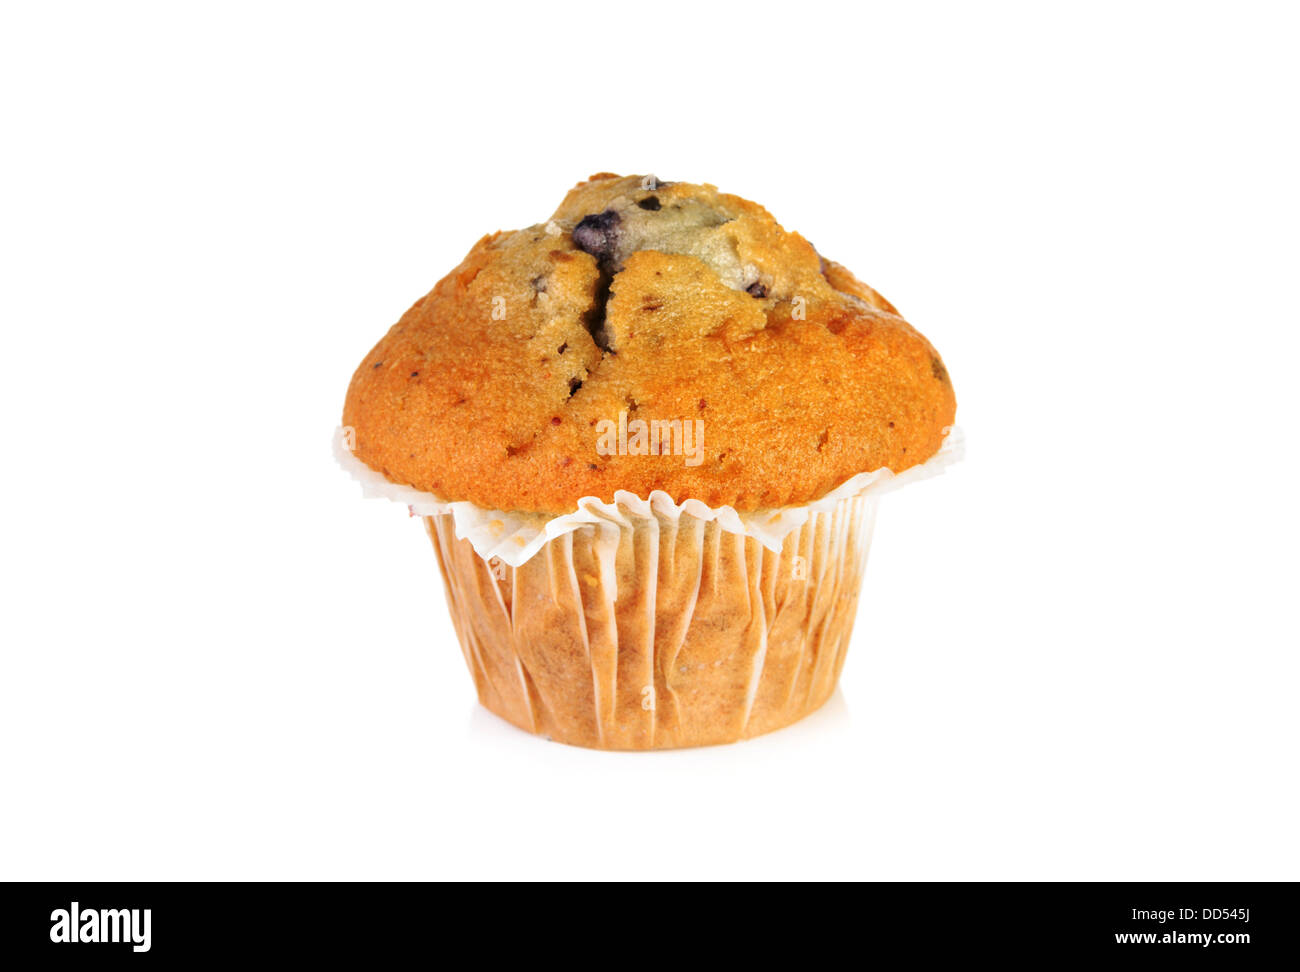 Blueberry muffin over white background Stock Photo - Alamy